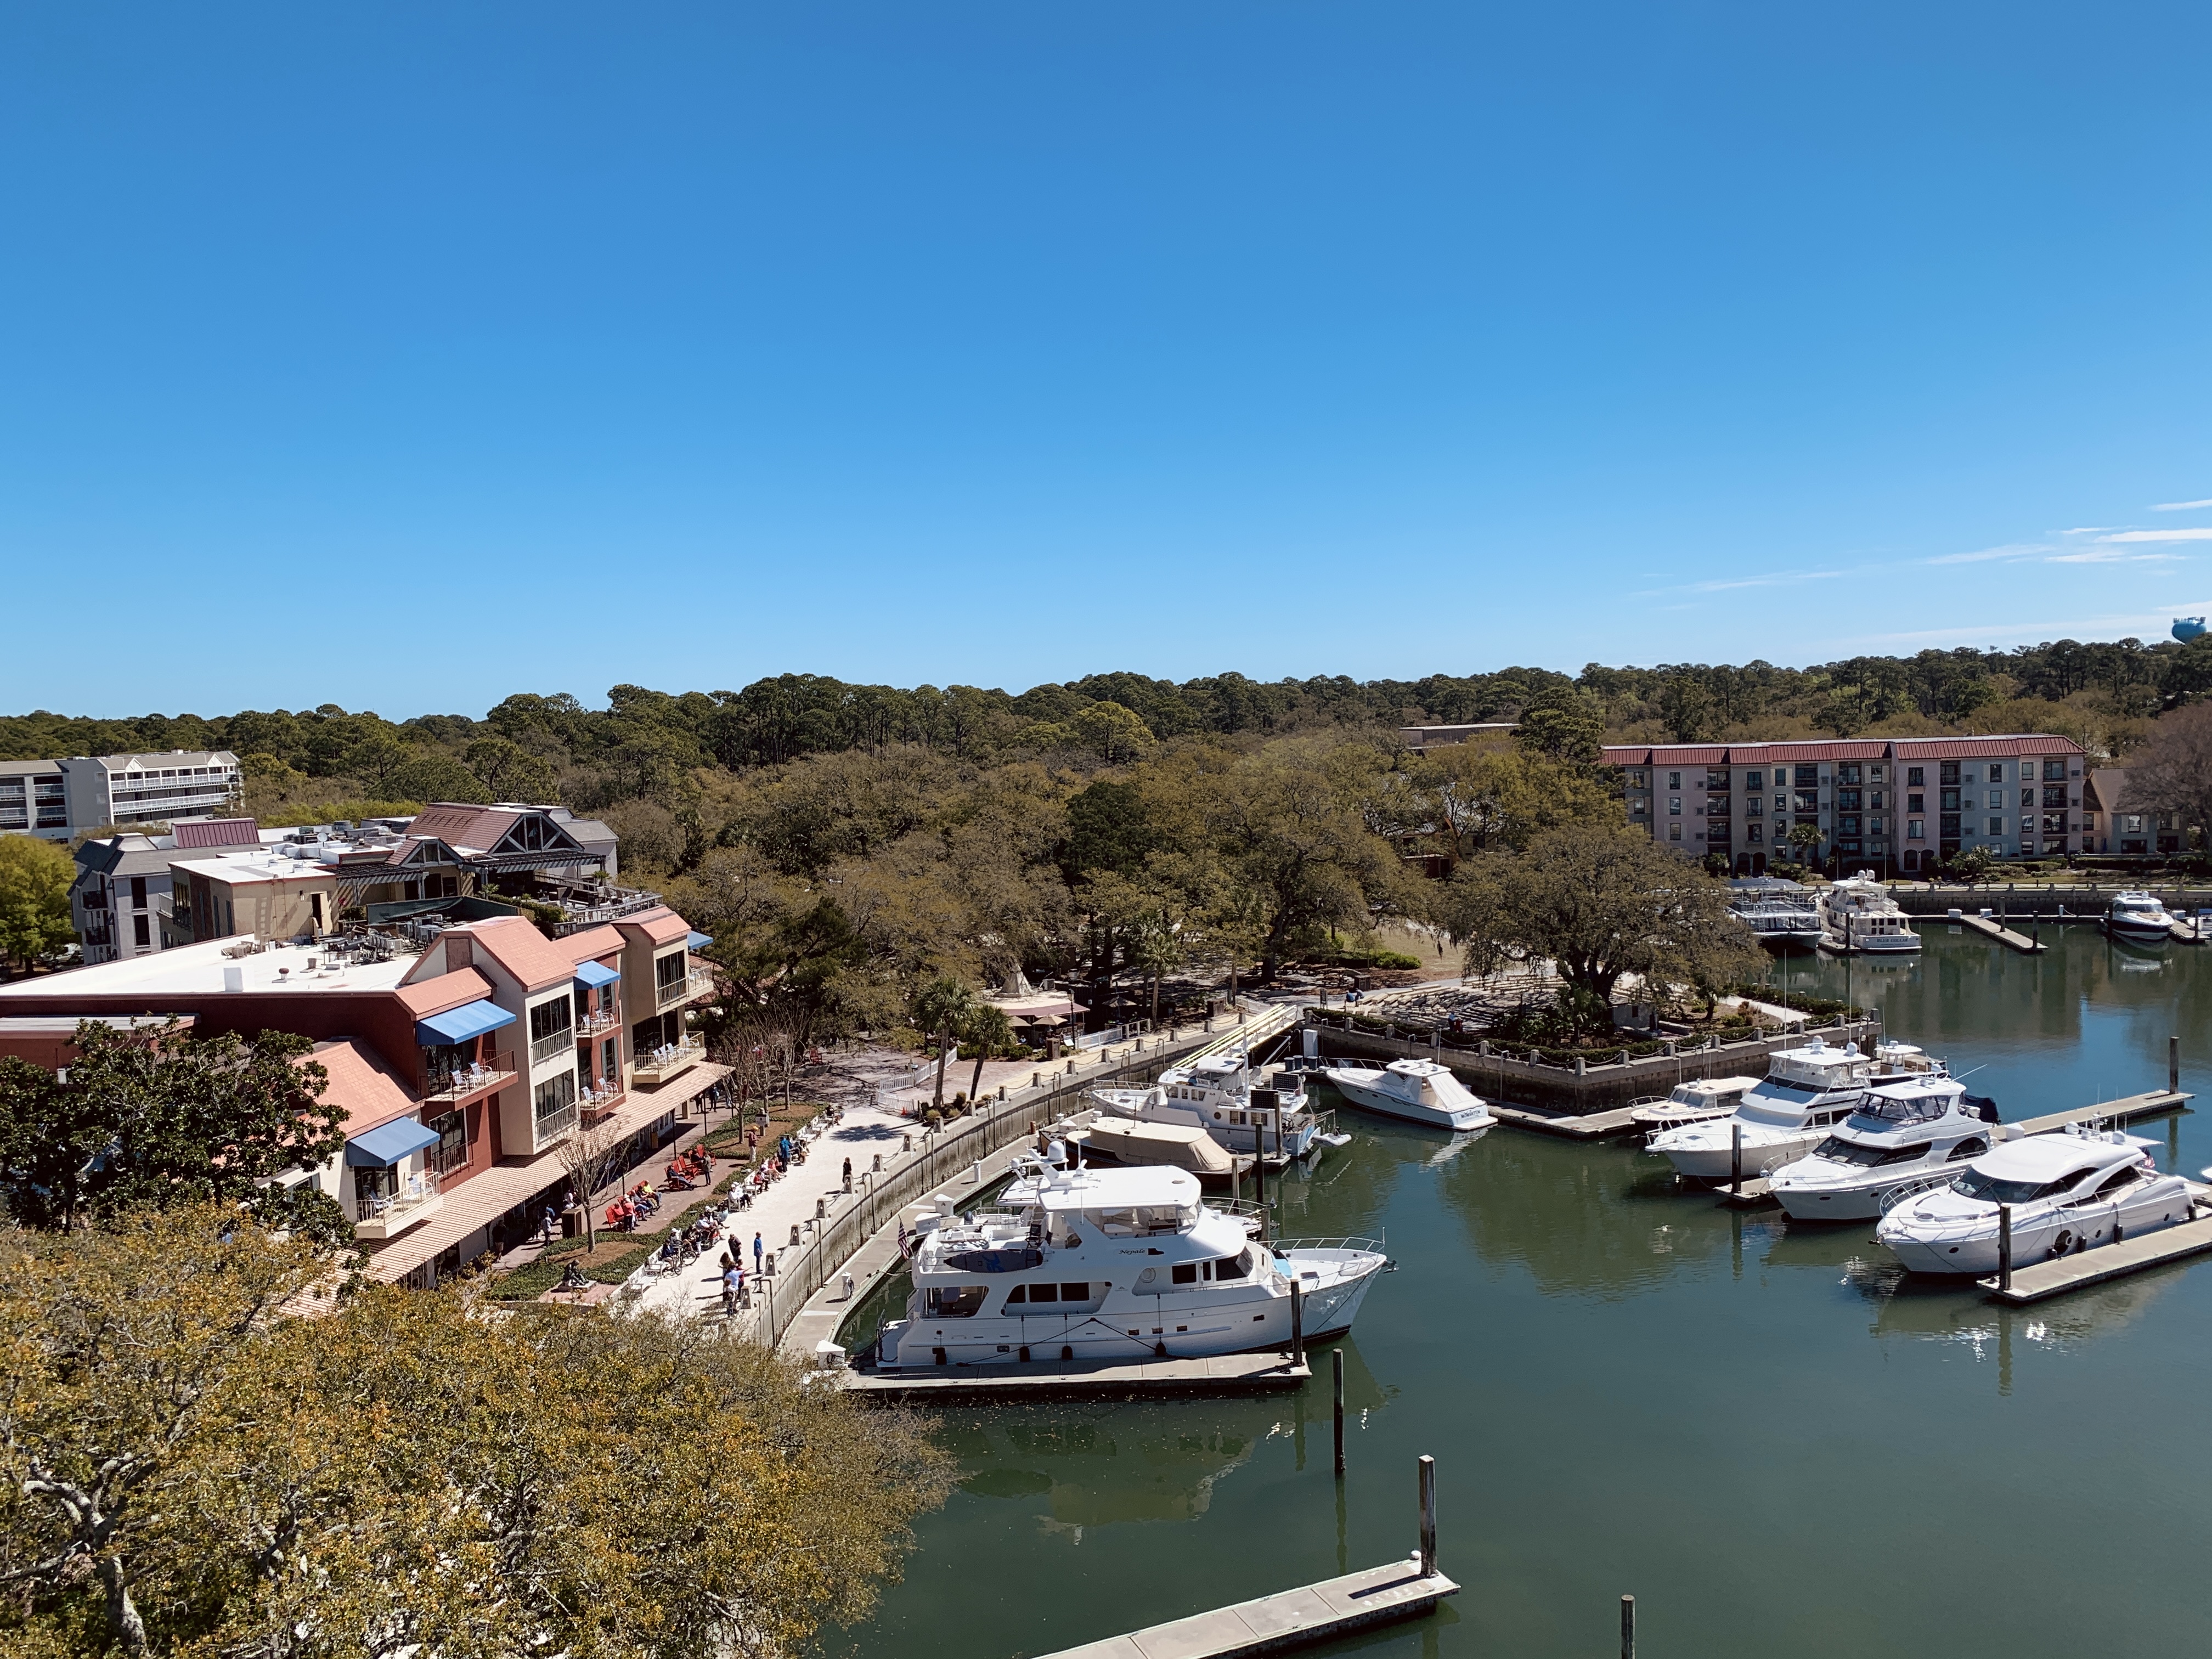 Picture of Harbour Town, South Carolina from the top of the Lighthouse.